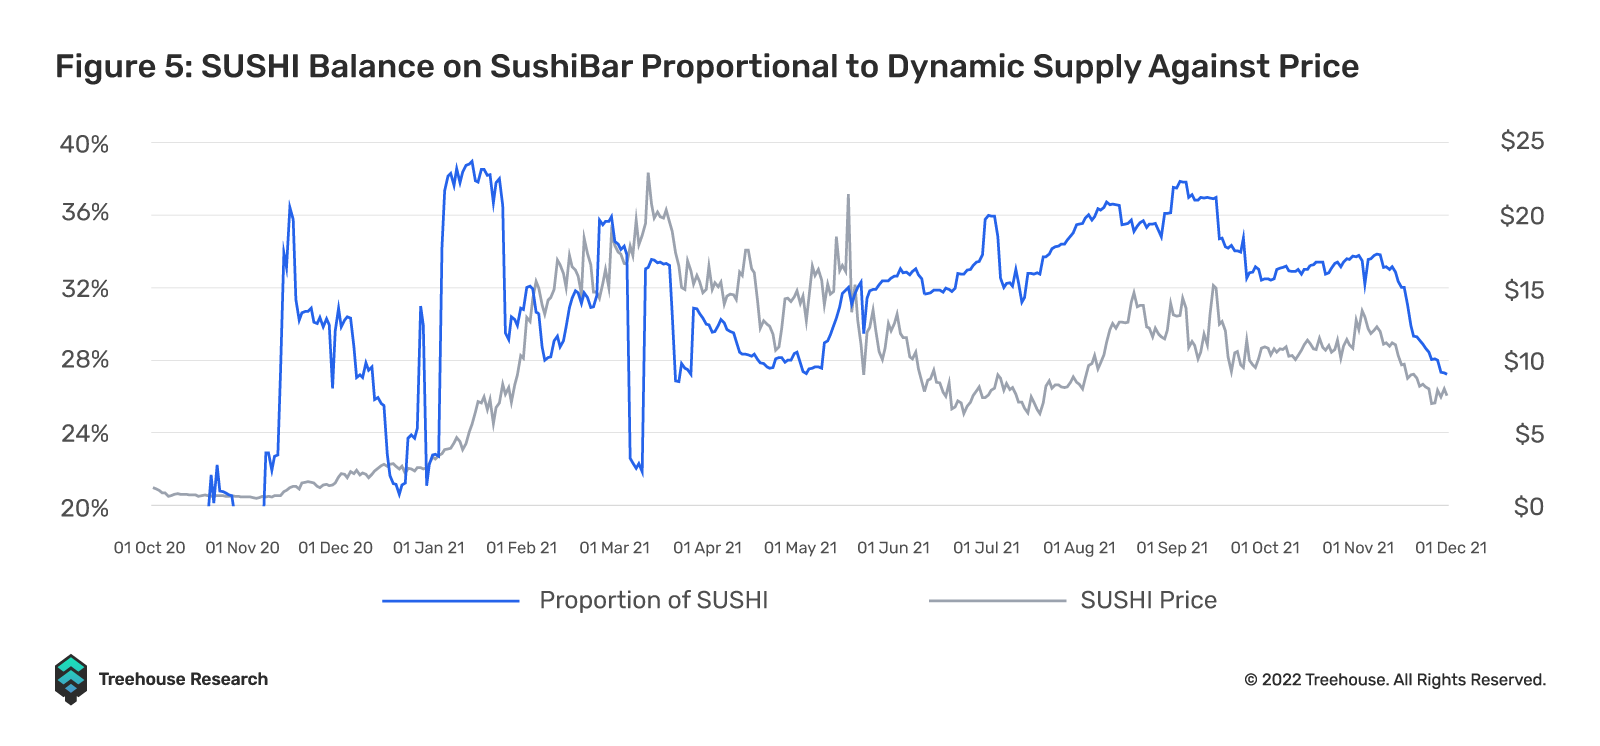 SUSHI balance on SushiBar proportional to dynamic supply against price 